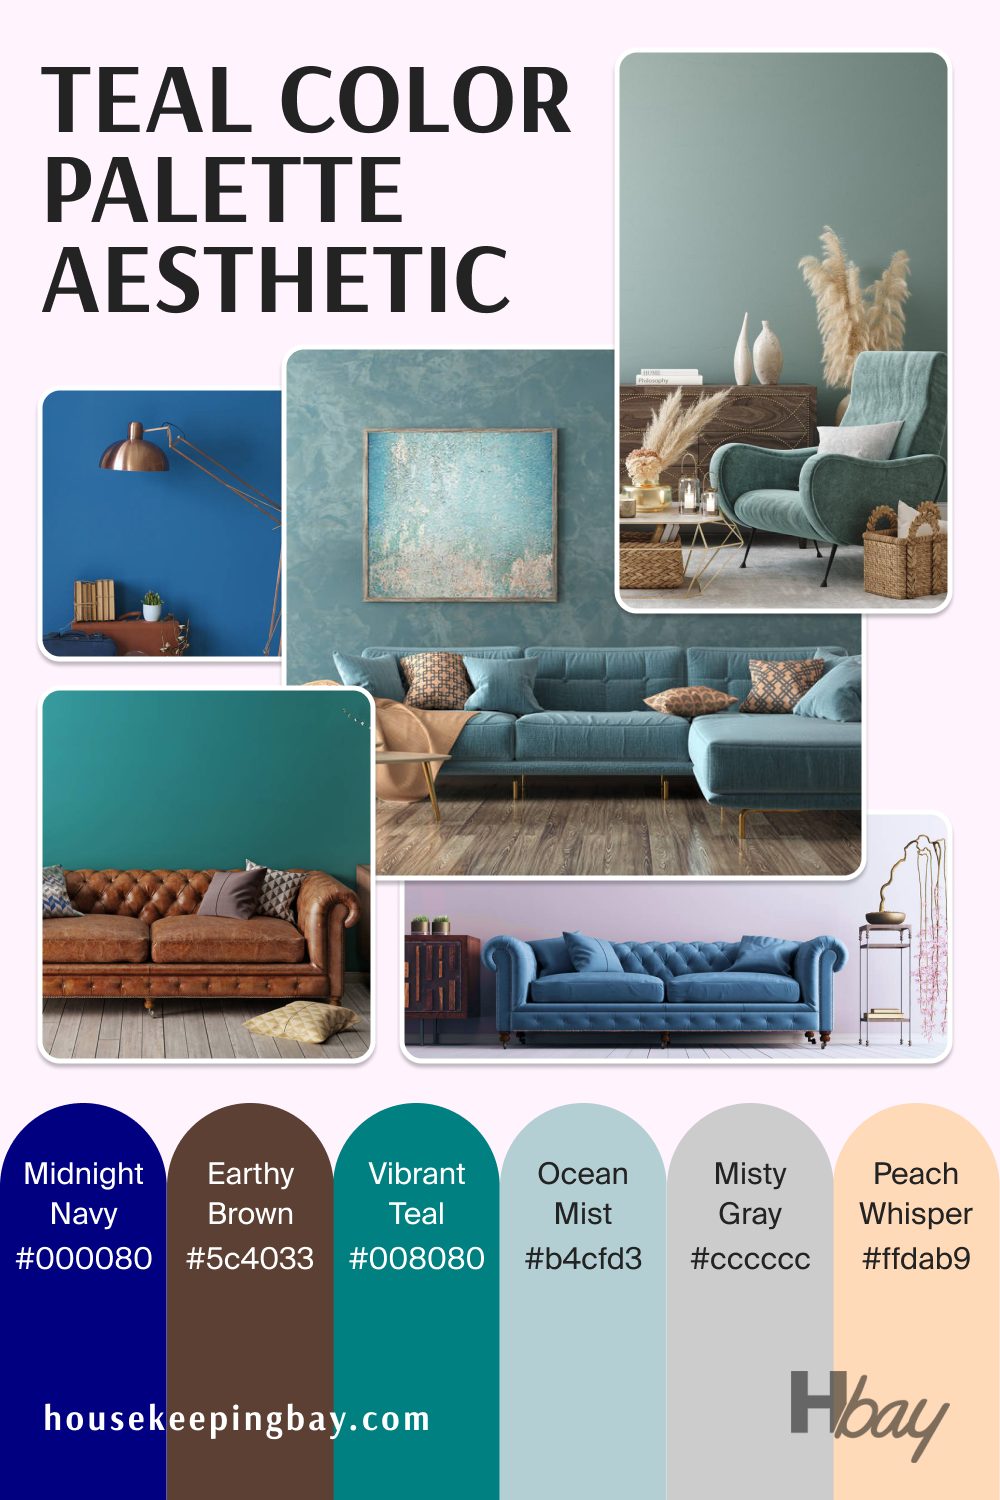 teal color palette aesthetic